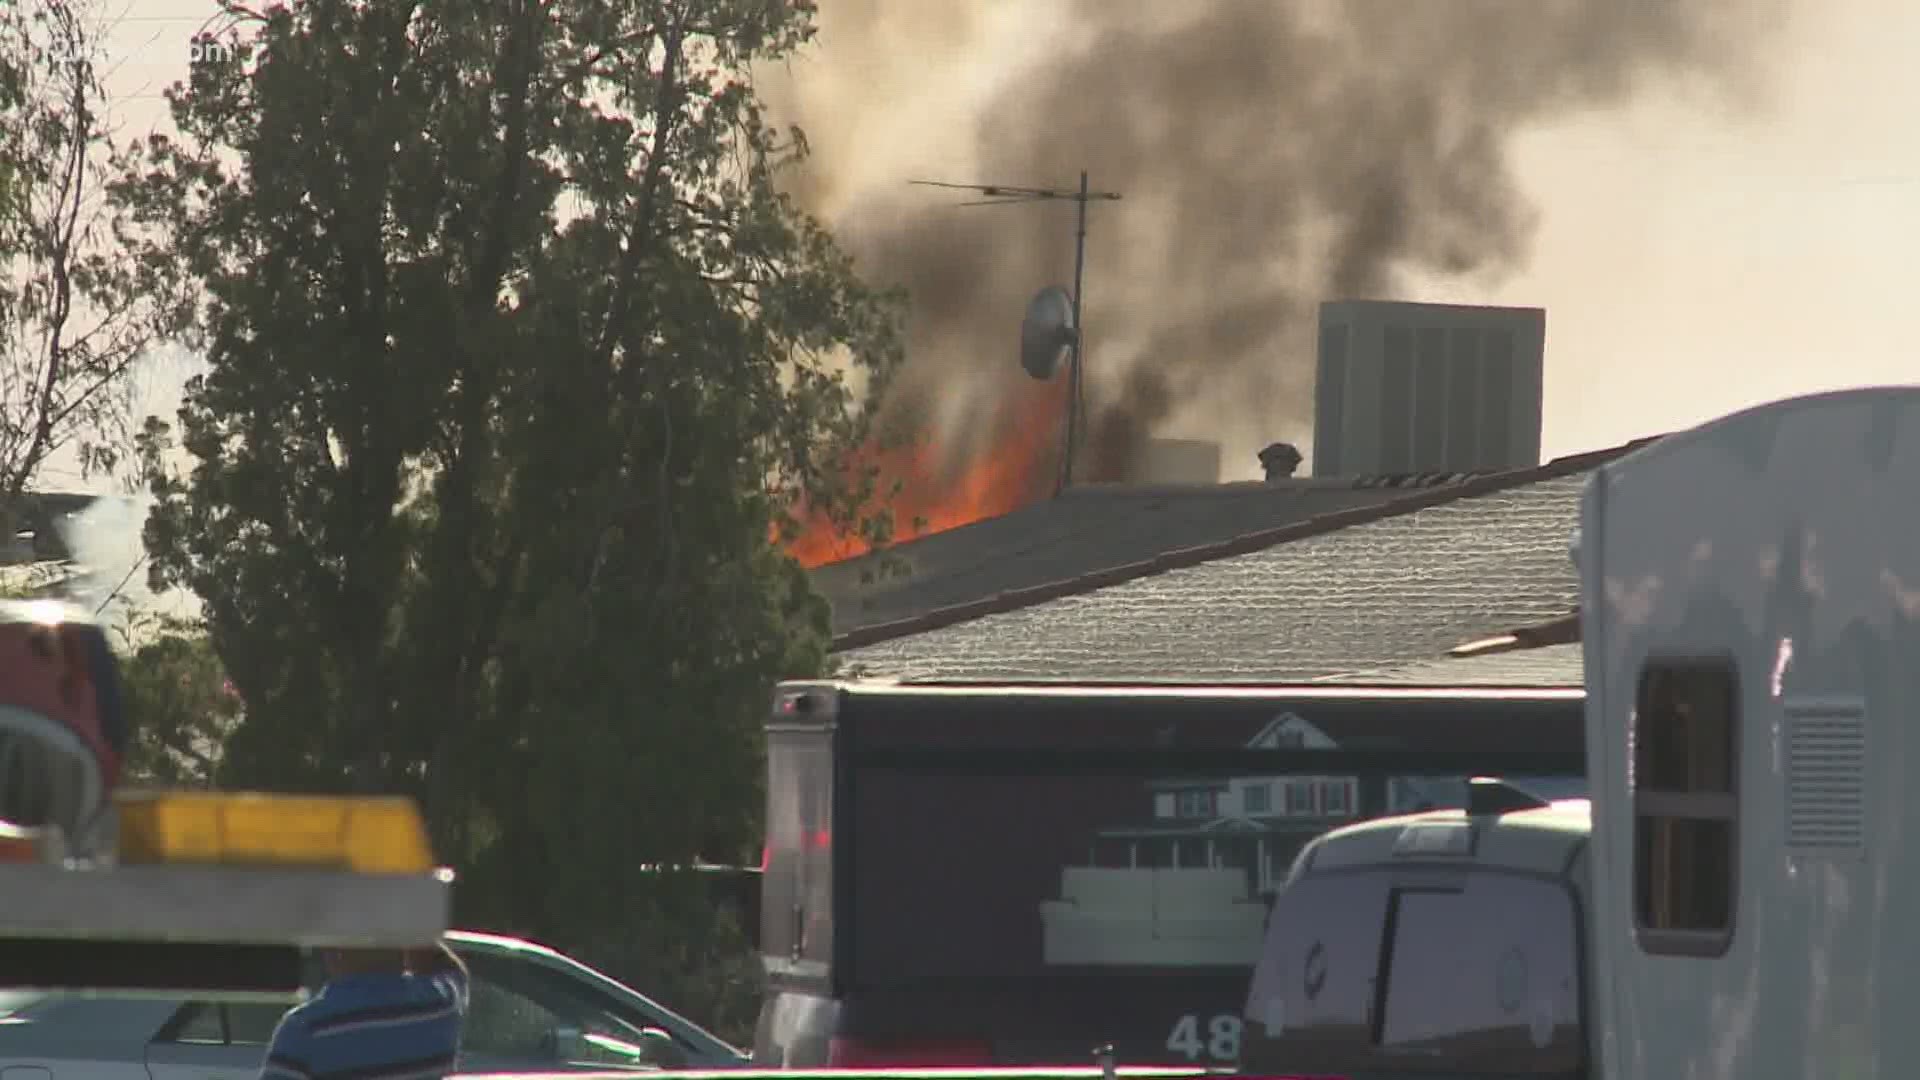 Two families are displaced after a double house fire in east Phoenix this afternoon.